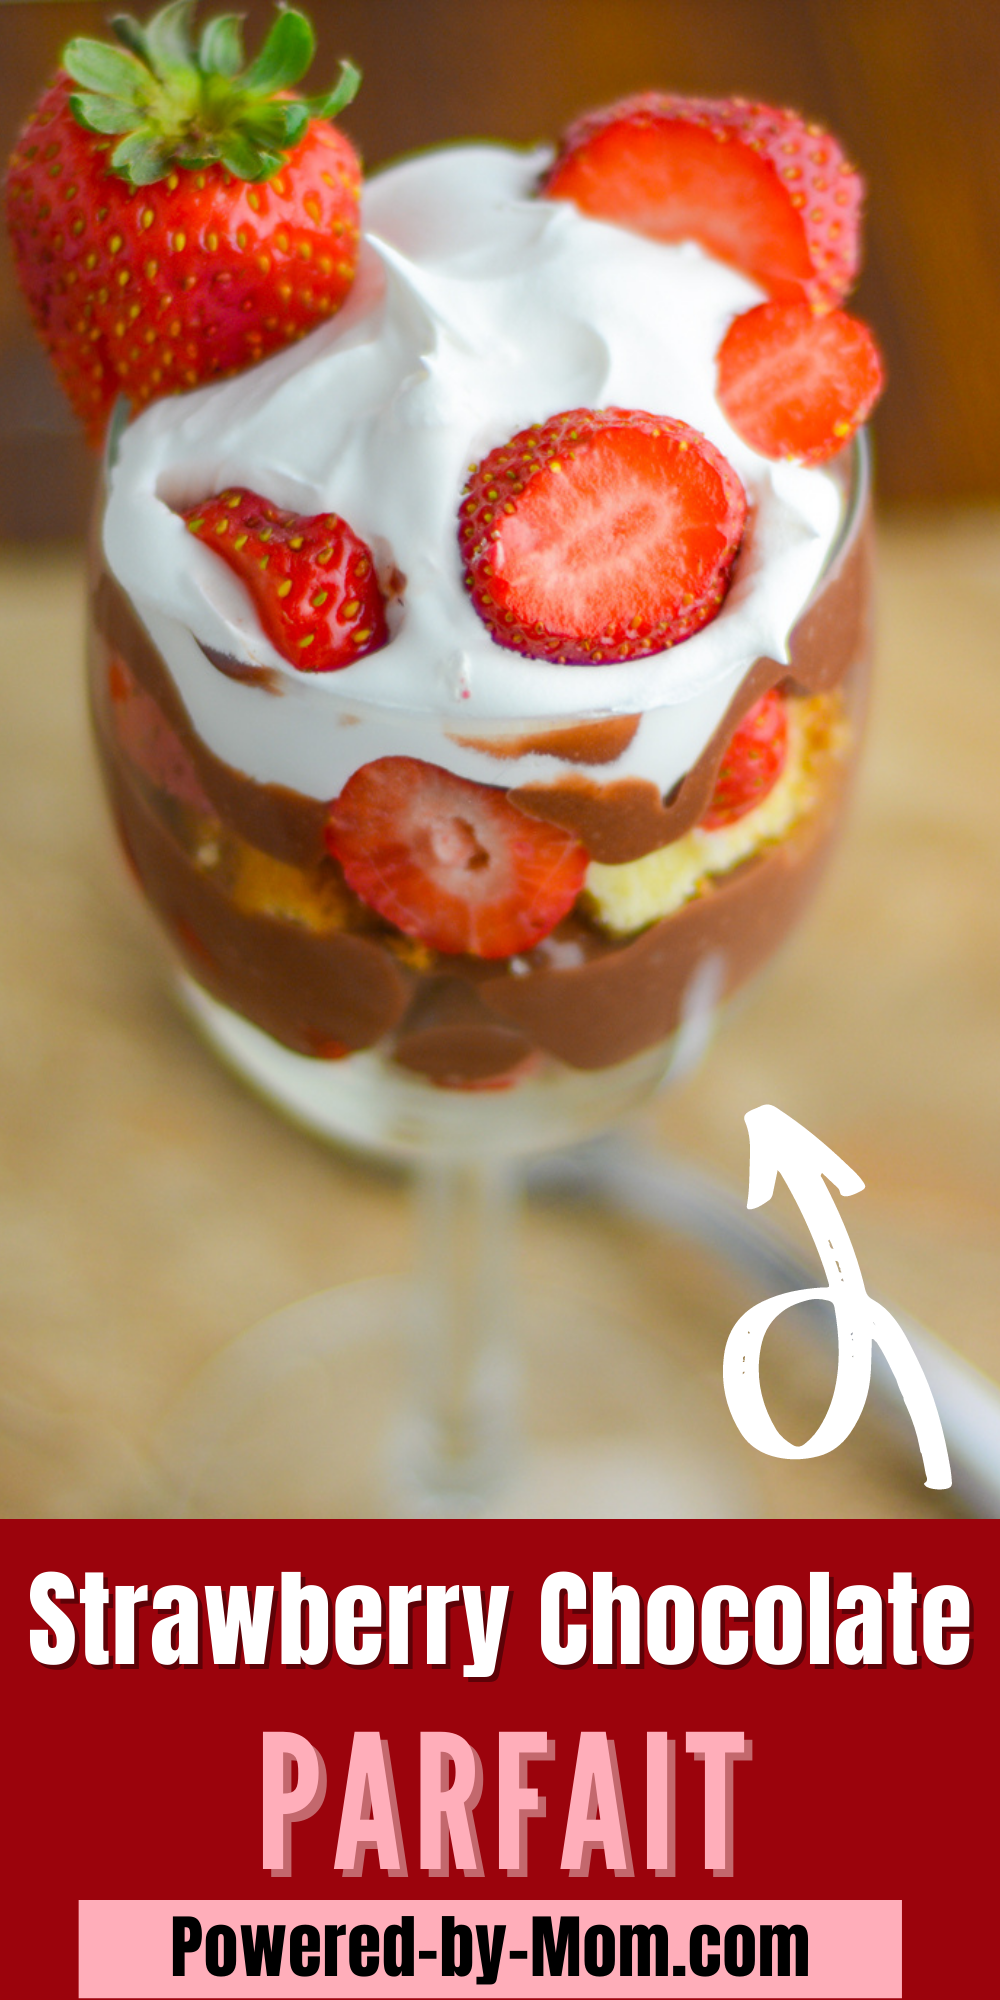 Enjoy this easy peasy dessert that looks like you slaved for hours over it. This Strawberry chocolate parfait dessert is delicious and great for any occasion.